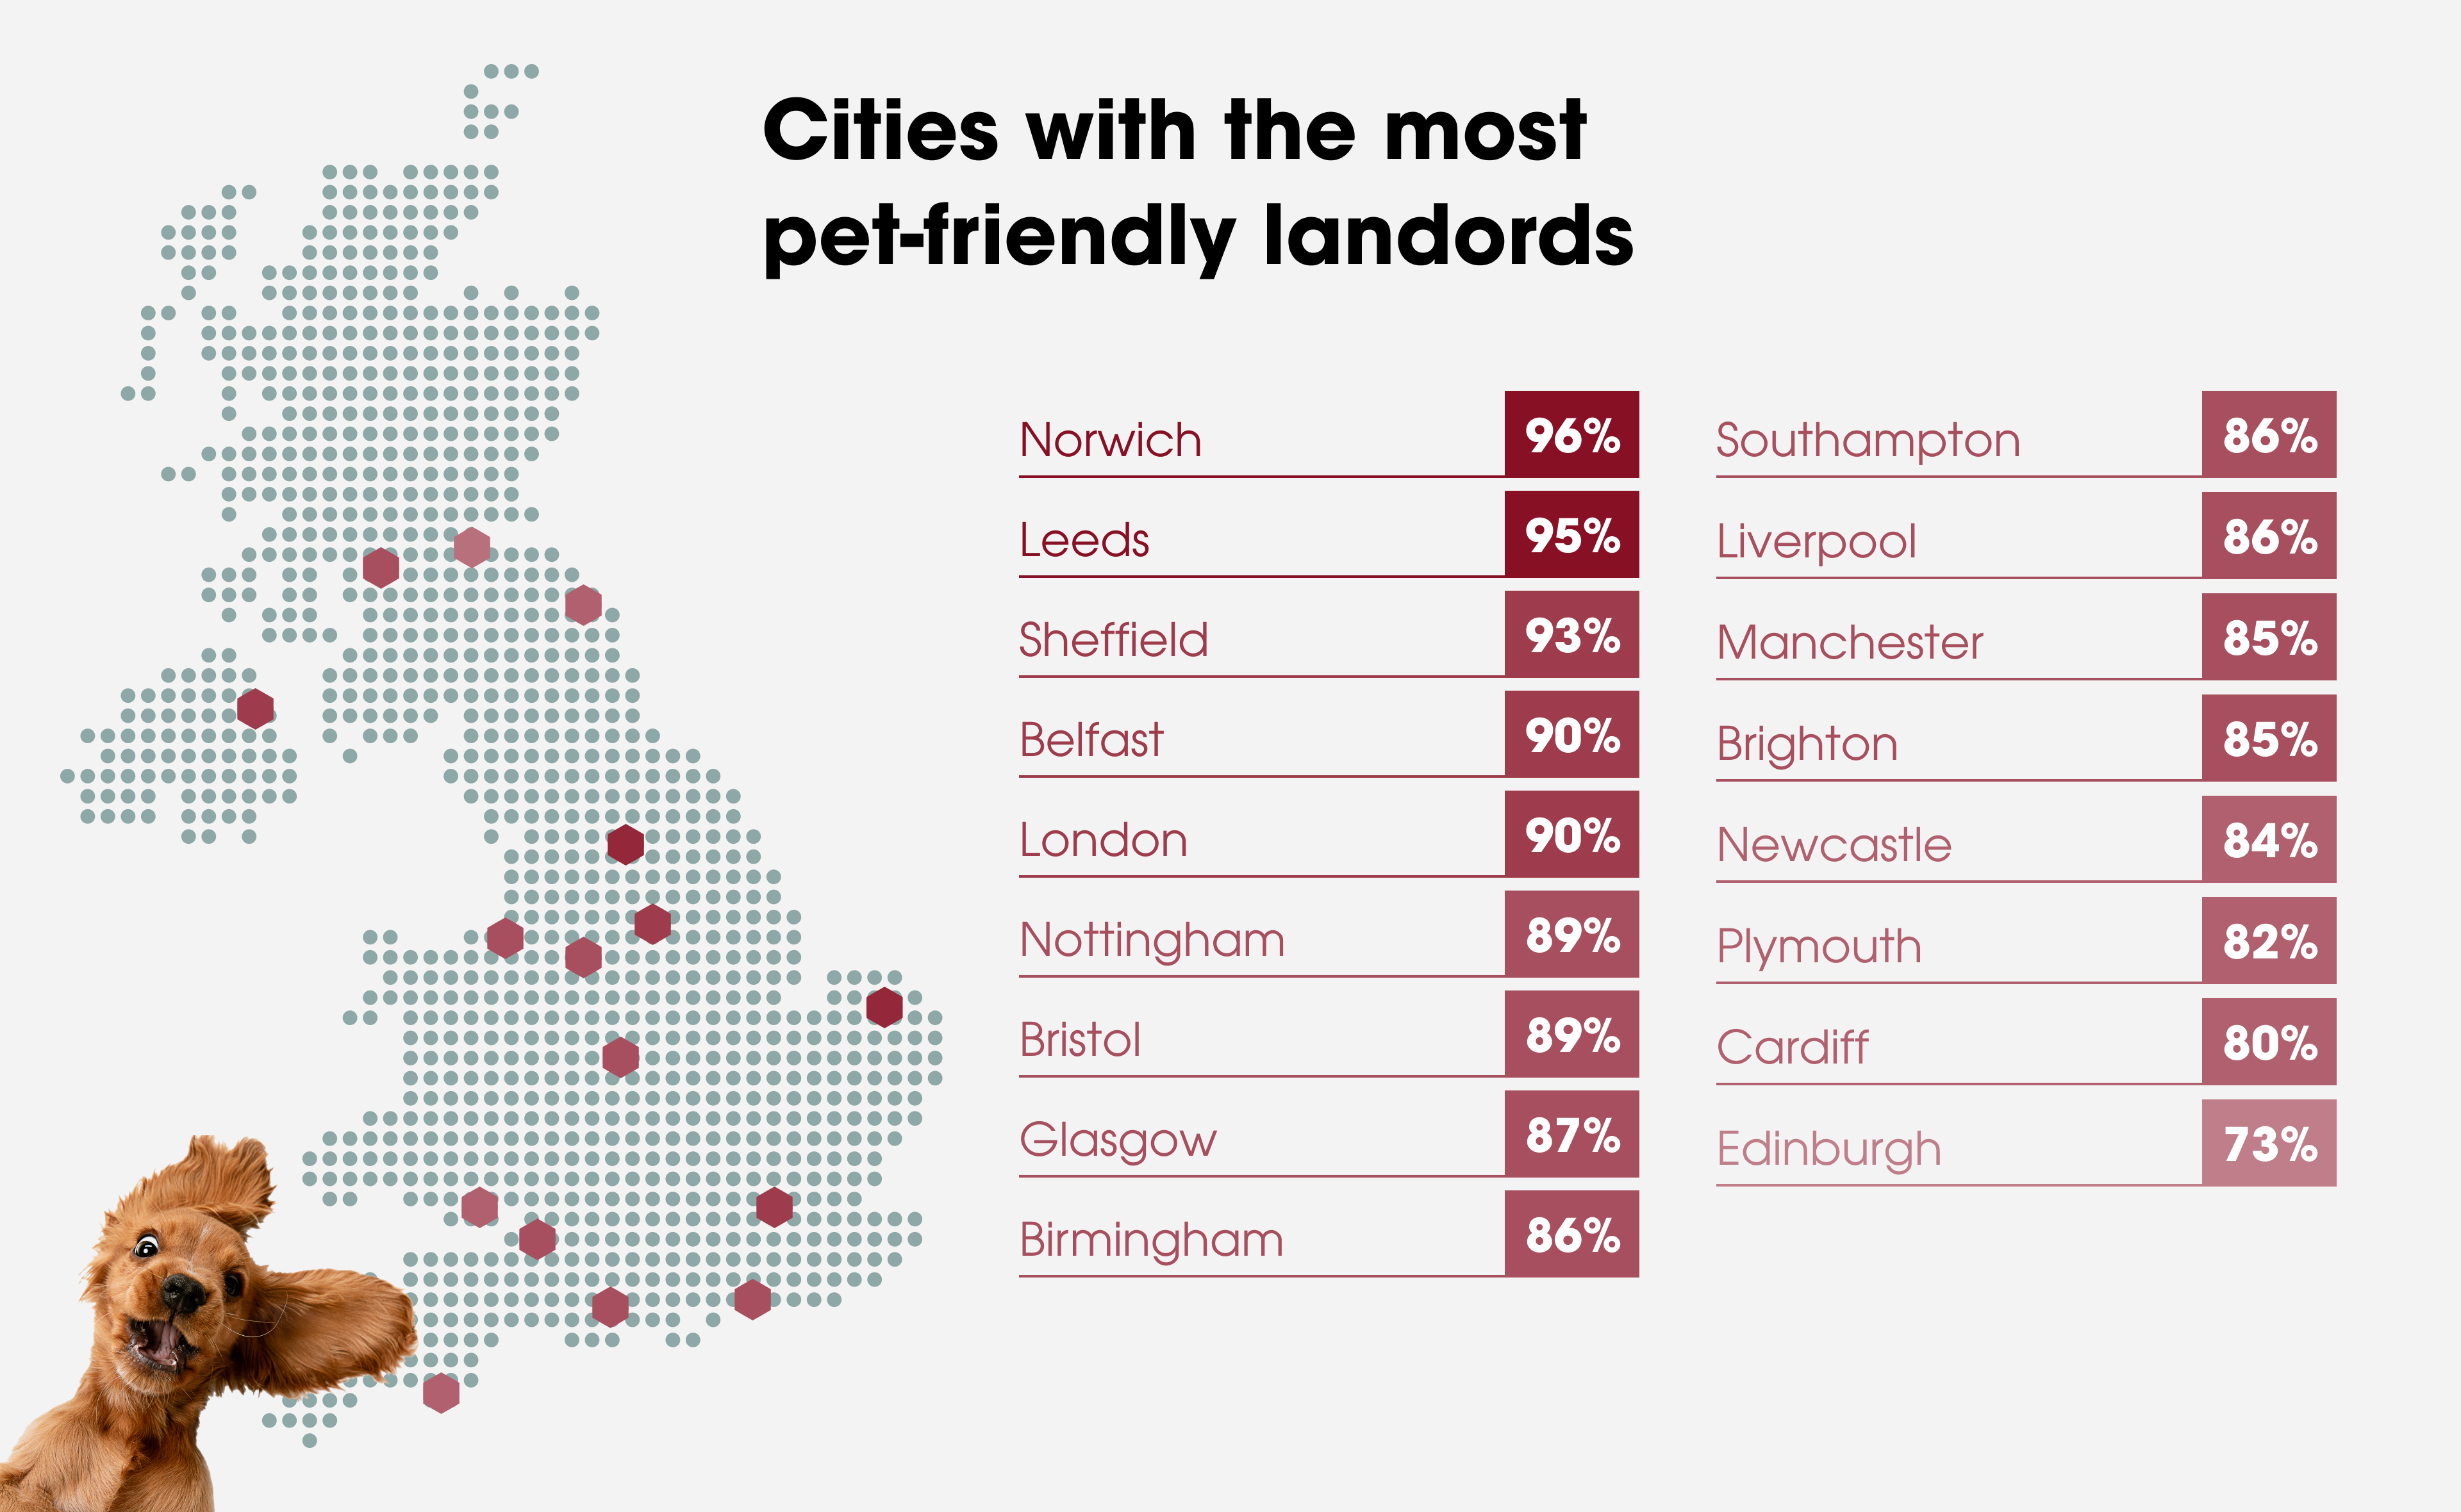 Cities with the most pet-friendly landords